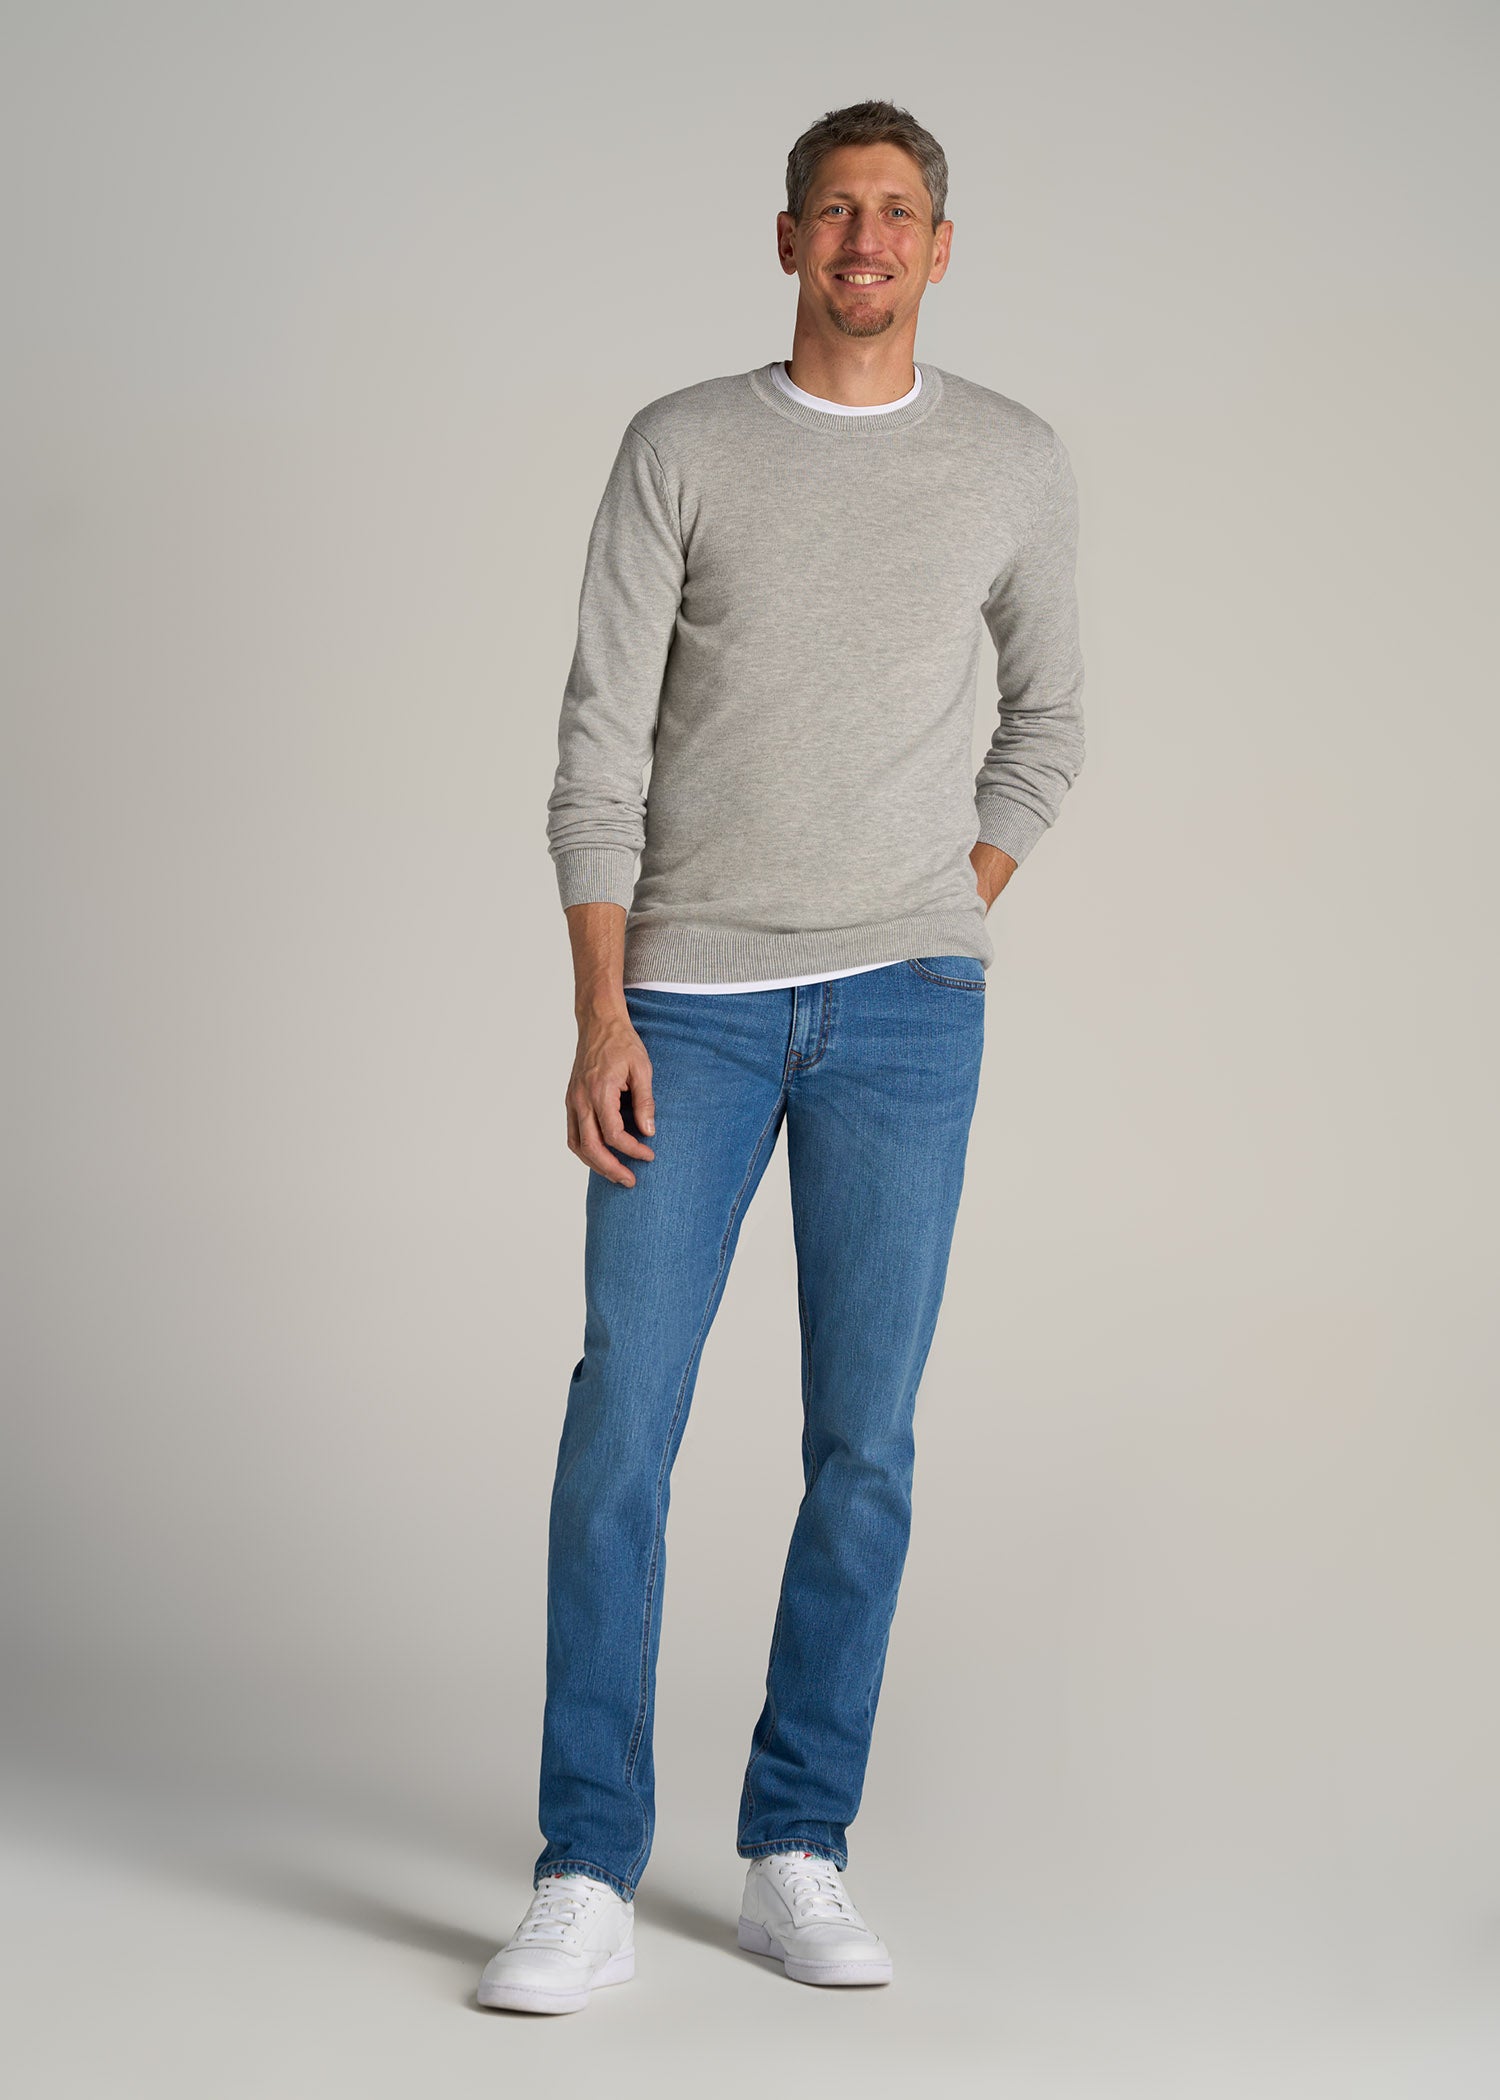 Carman Tapered Jeans For Tall Men Mid Blue Tall